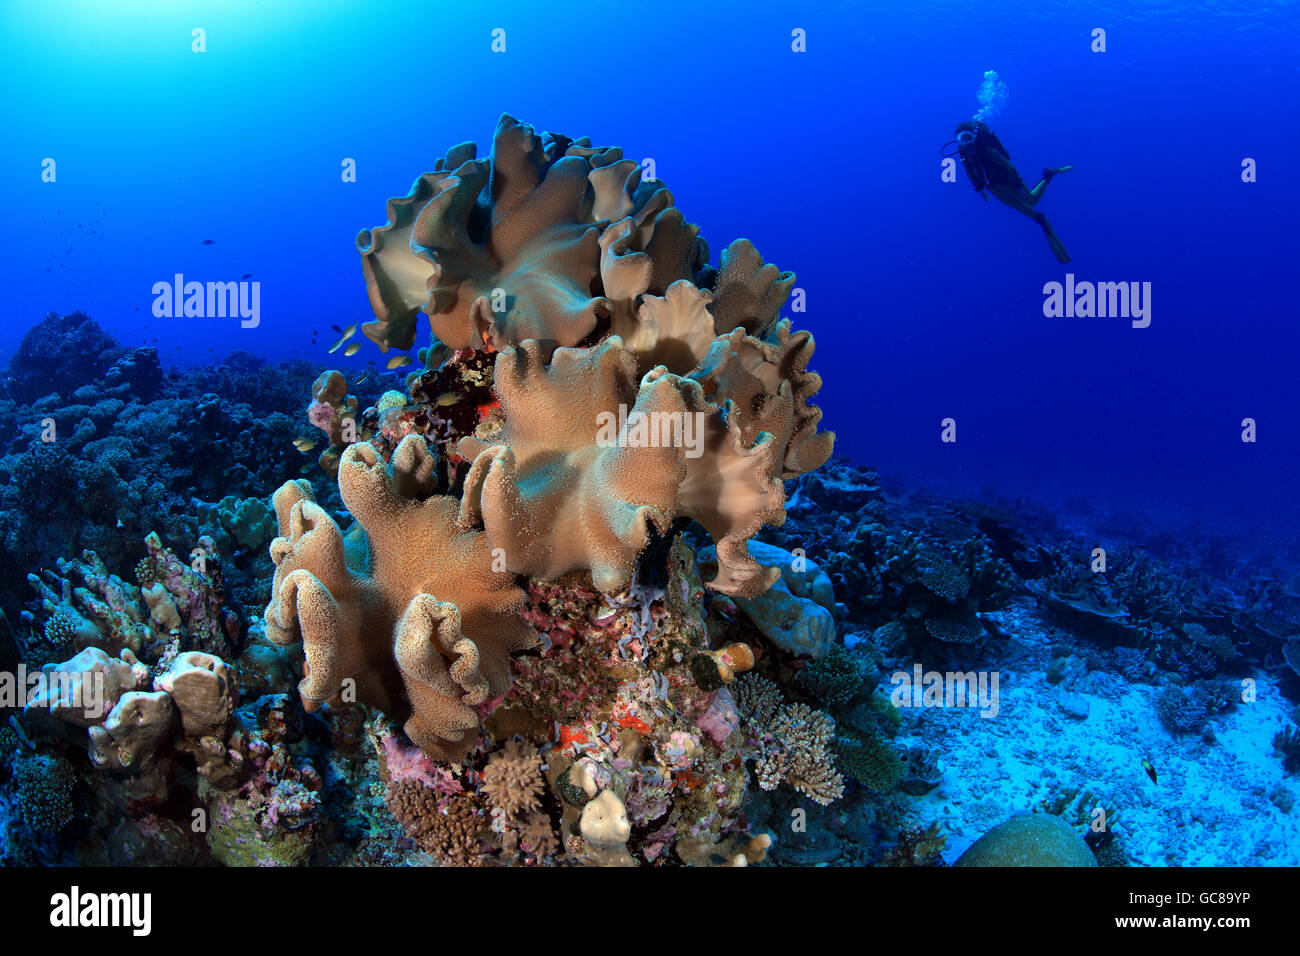 Tropical Coral reef in Oceano Indiano Foto Stock